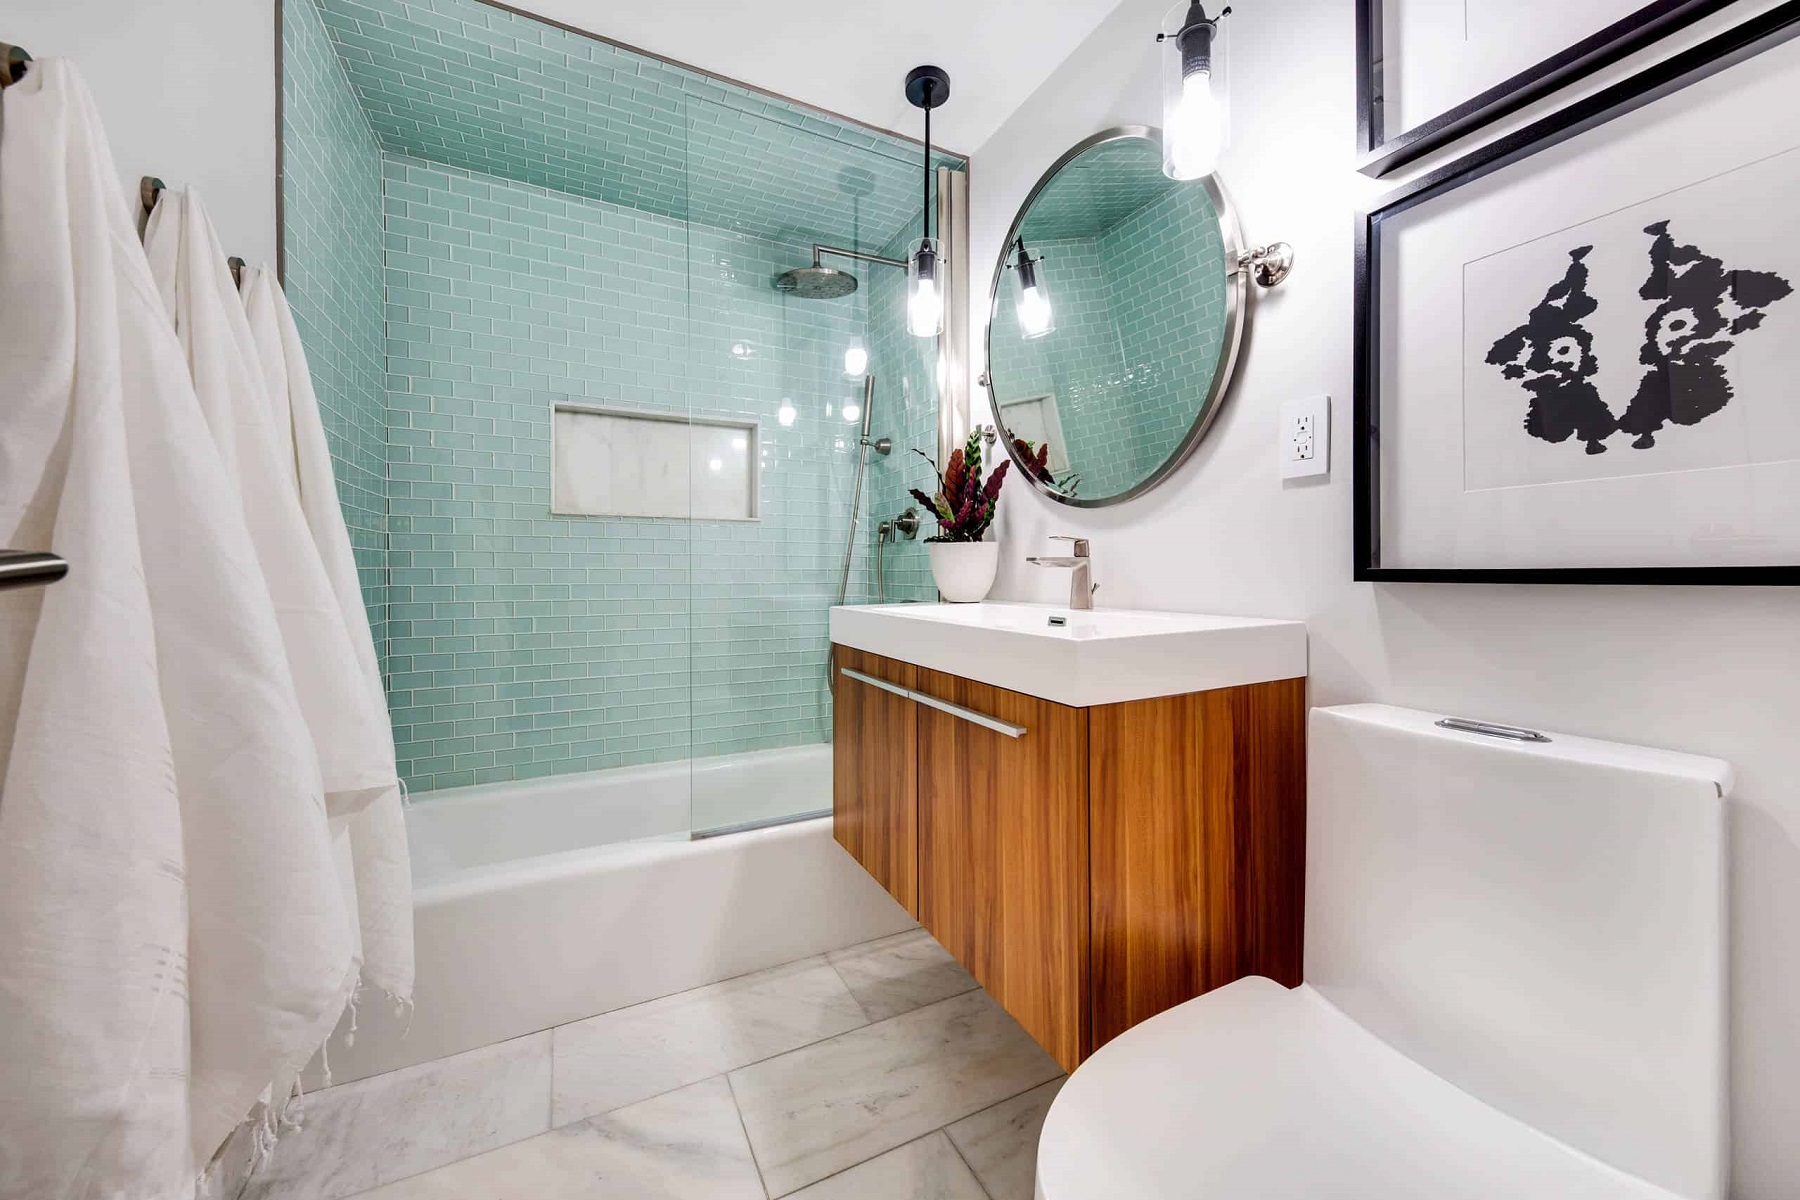 How To Plan A Small Bathroom Remodel - 2021 Guidelines